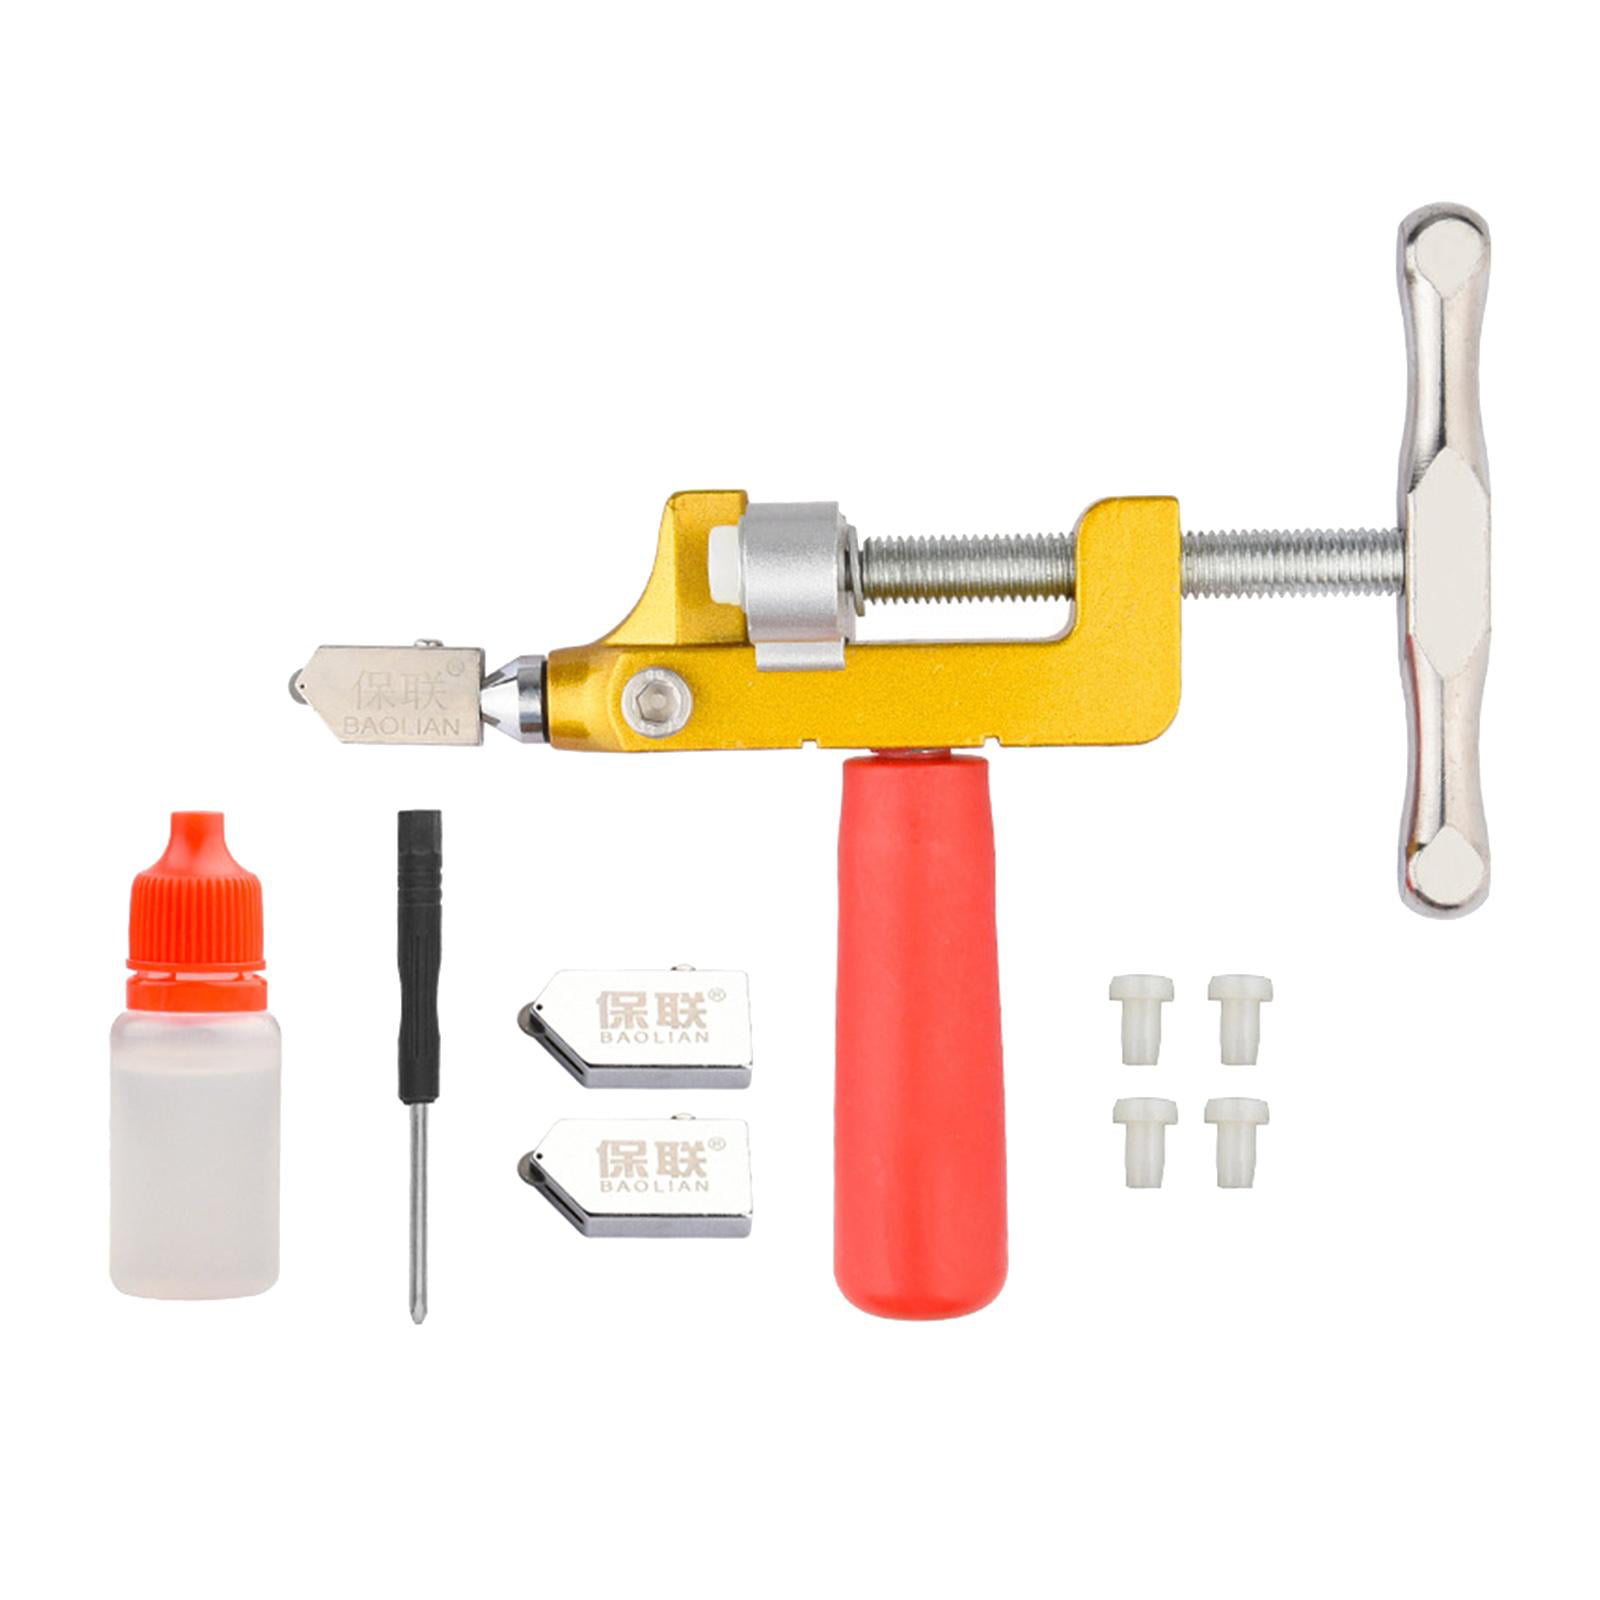 IMT Glass Cutter with Glass Breaking Pliers, Ceramic/Tiles Cutting Tool Kit